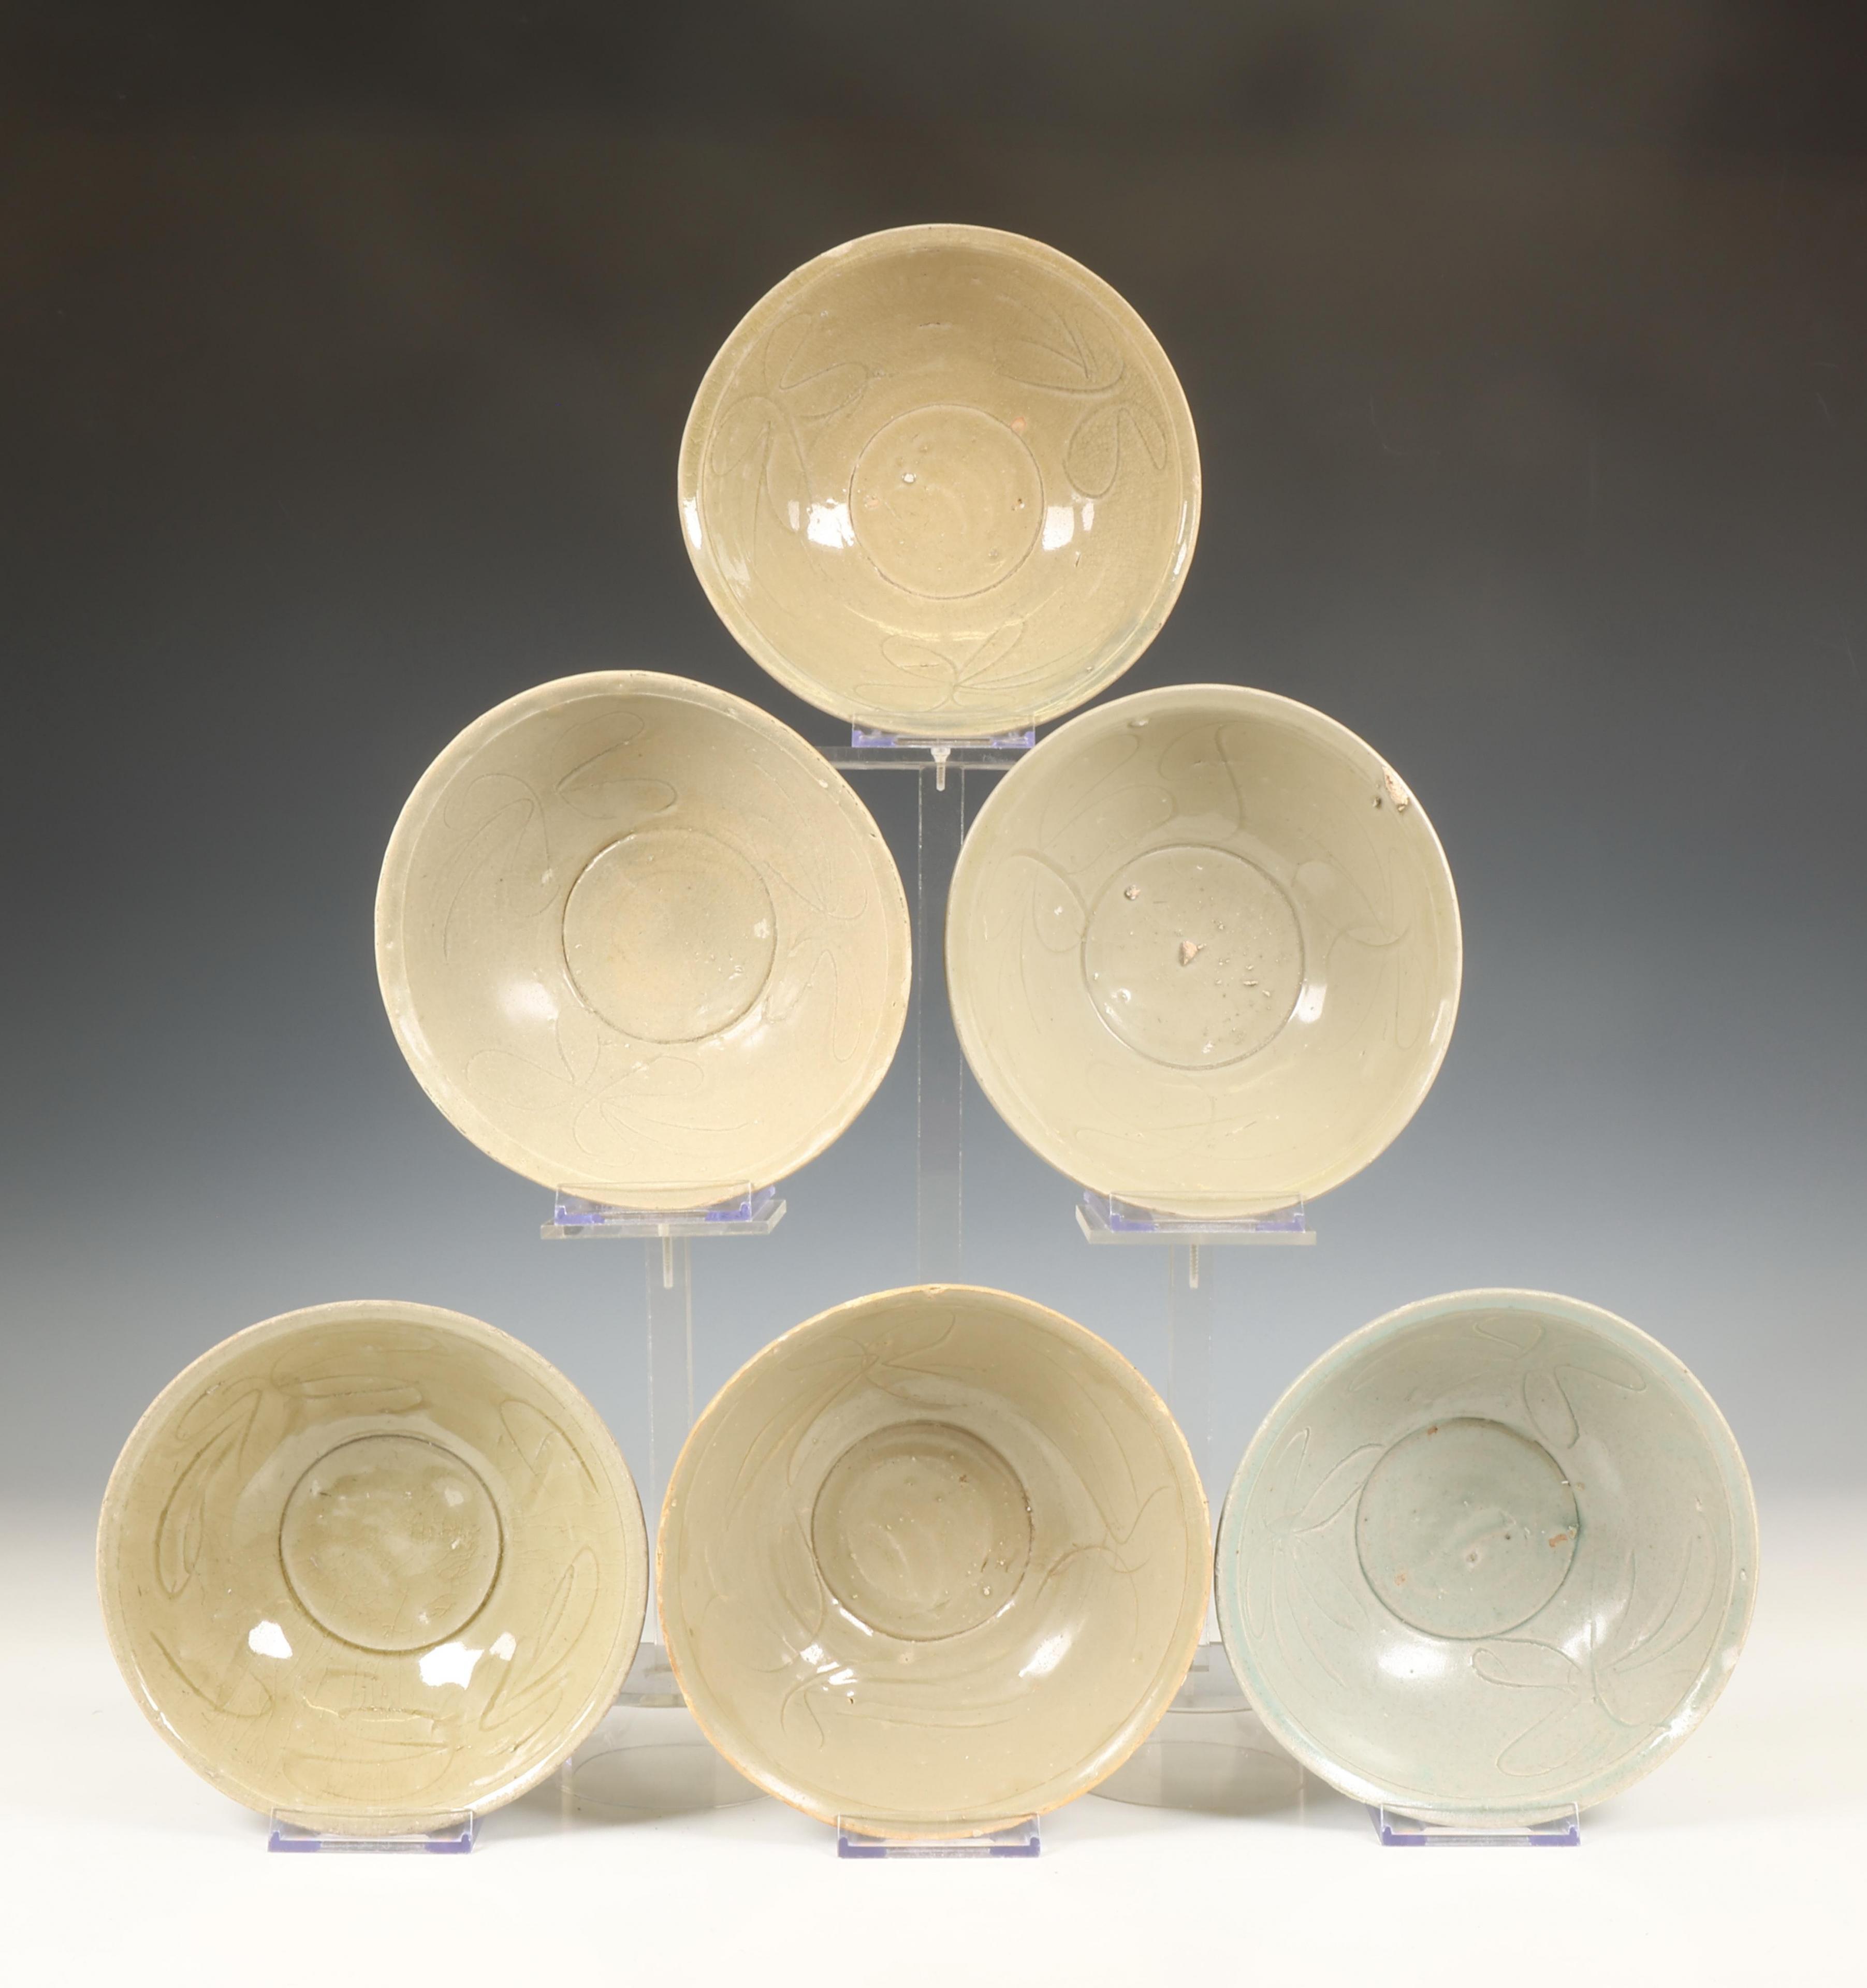 China, collection of twelve celadon-glazed bowls, Northern Song dynasty...